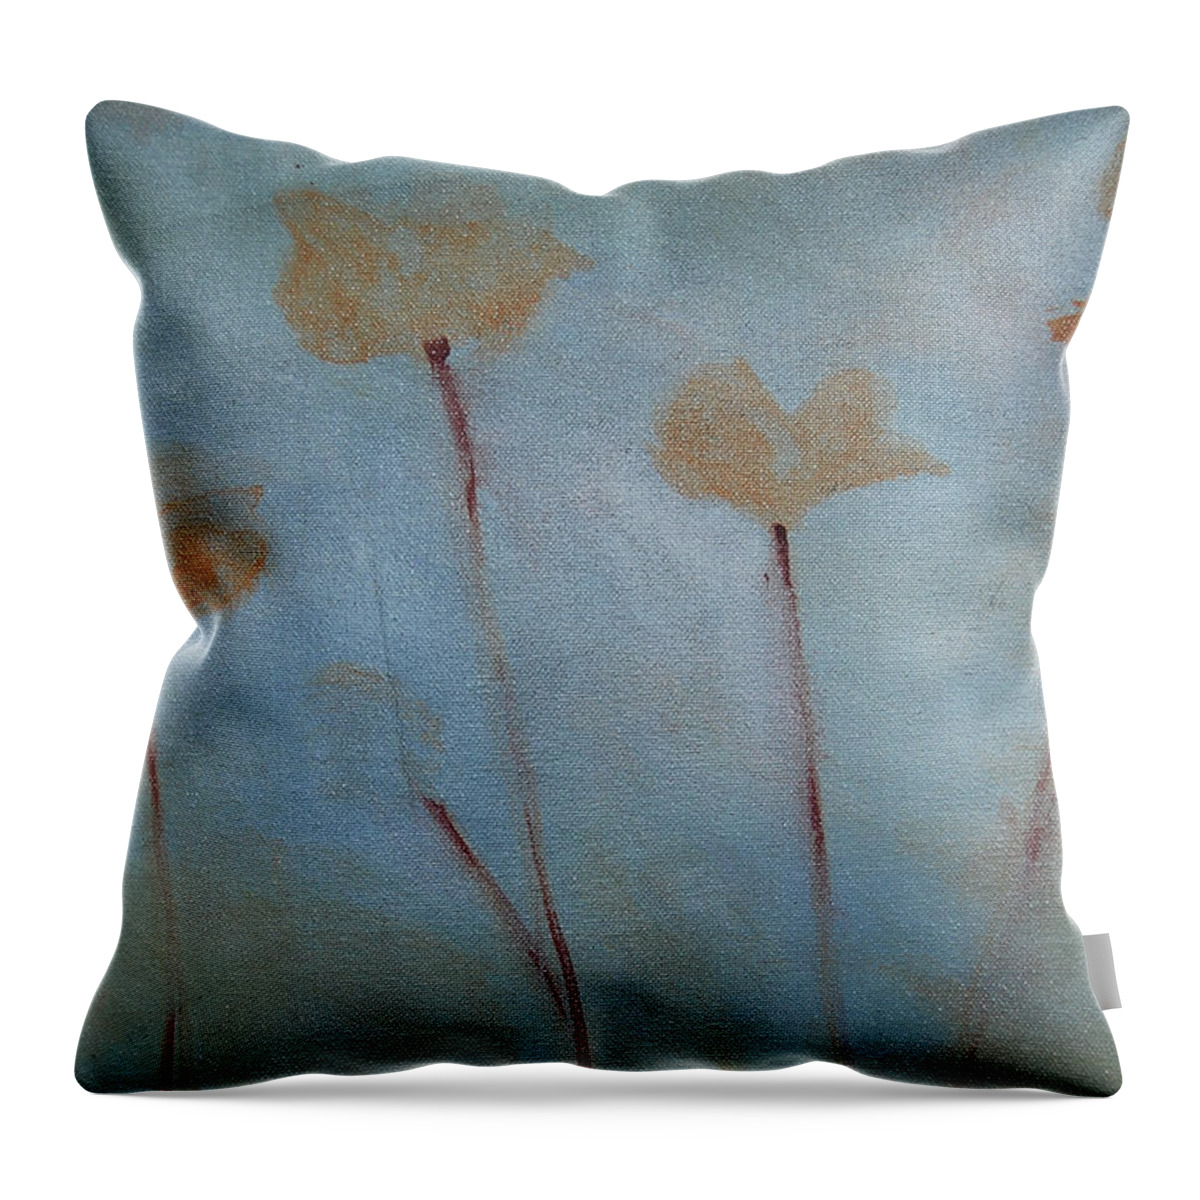 Flowers Throw Pillow featuring the painting Botanical Poppies by Jani Freimann